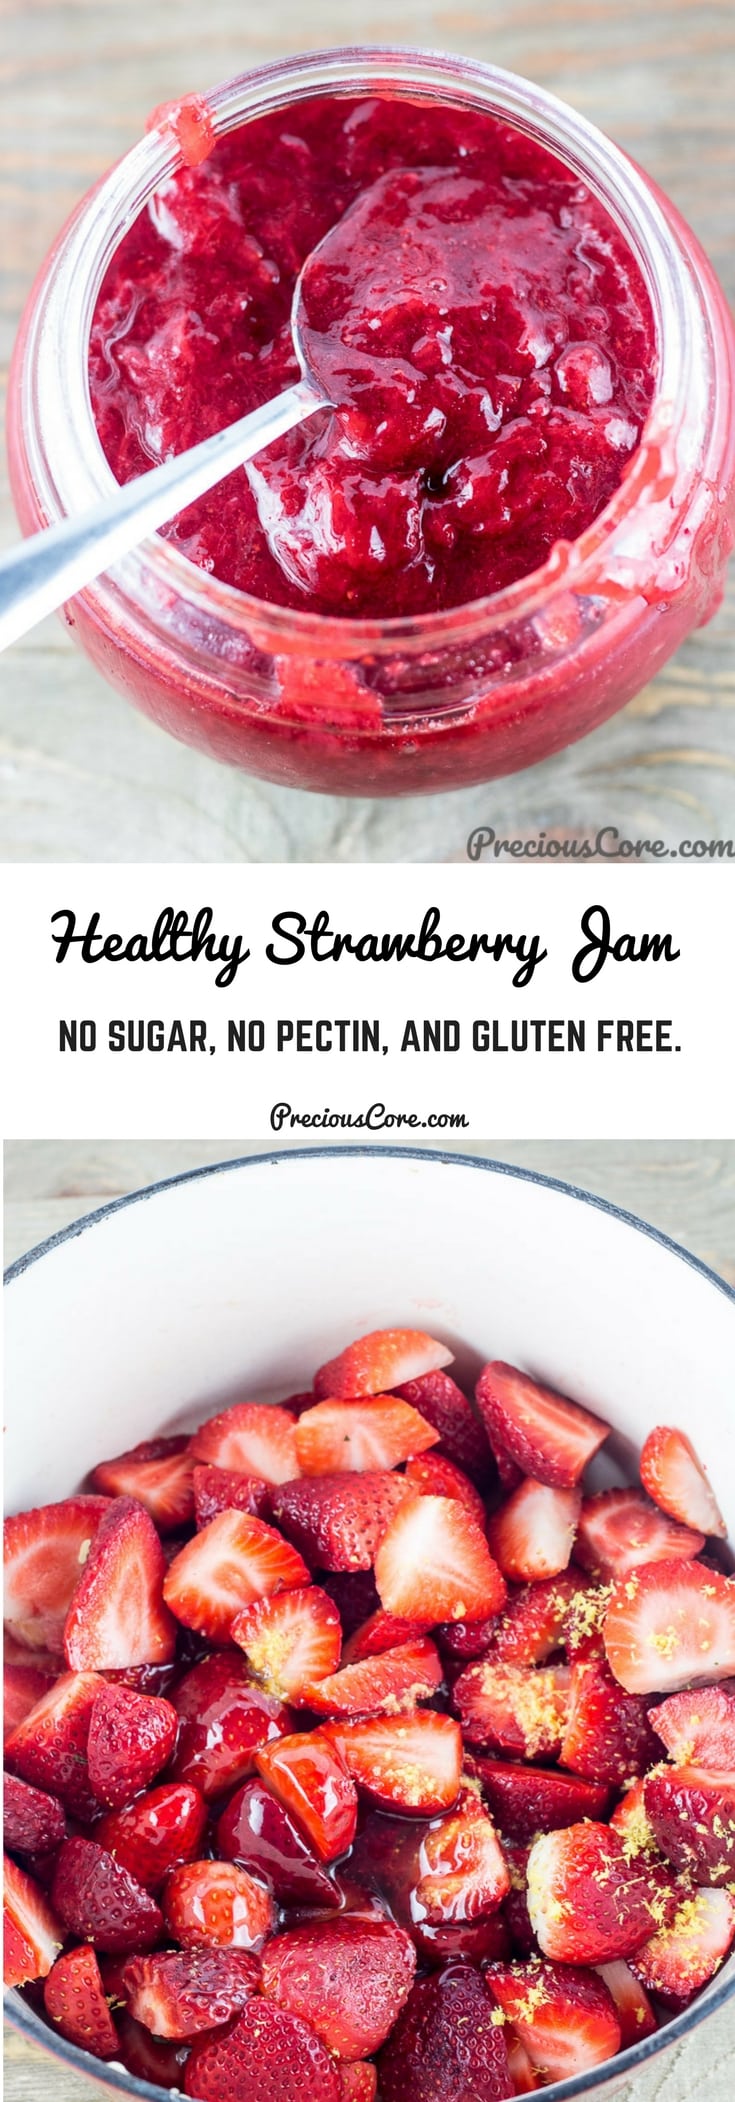 This healthy strawberry jam doesn't taste healthy at all. It is sweet, fruity with a gel-like consistency like a jam should be. It is made without sugar or pectin. Enjoy at your breakfast table with bread, pancakes and more. Get the recipe on Precious Core. #healthy #breakfast #glutenfree